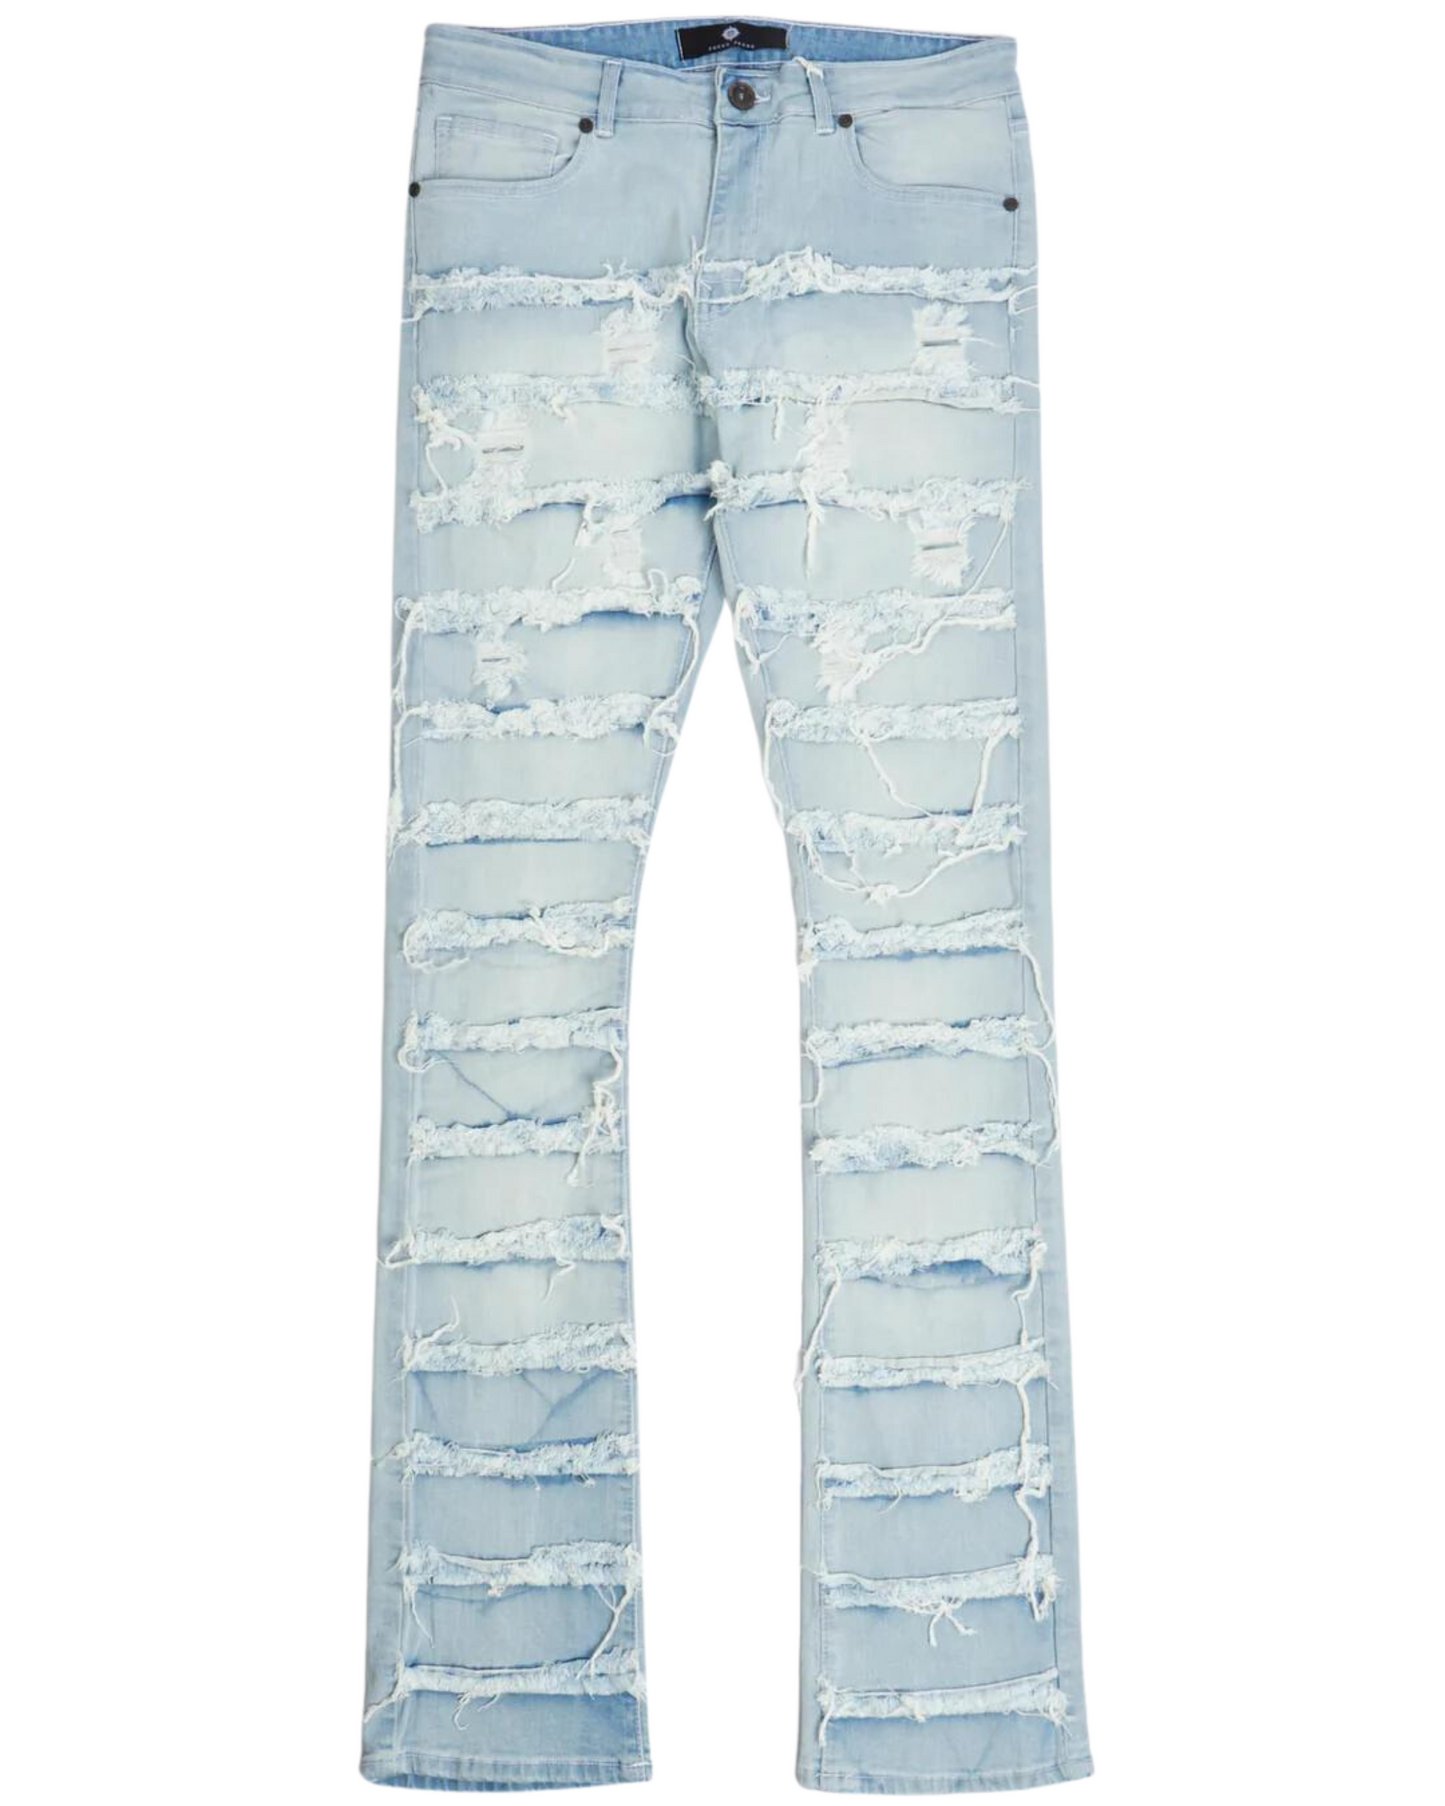 Stacked Jeans 3364